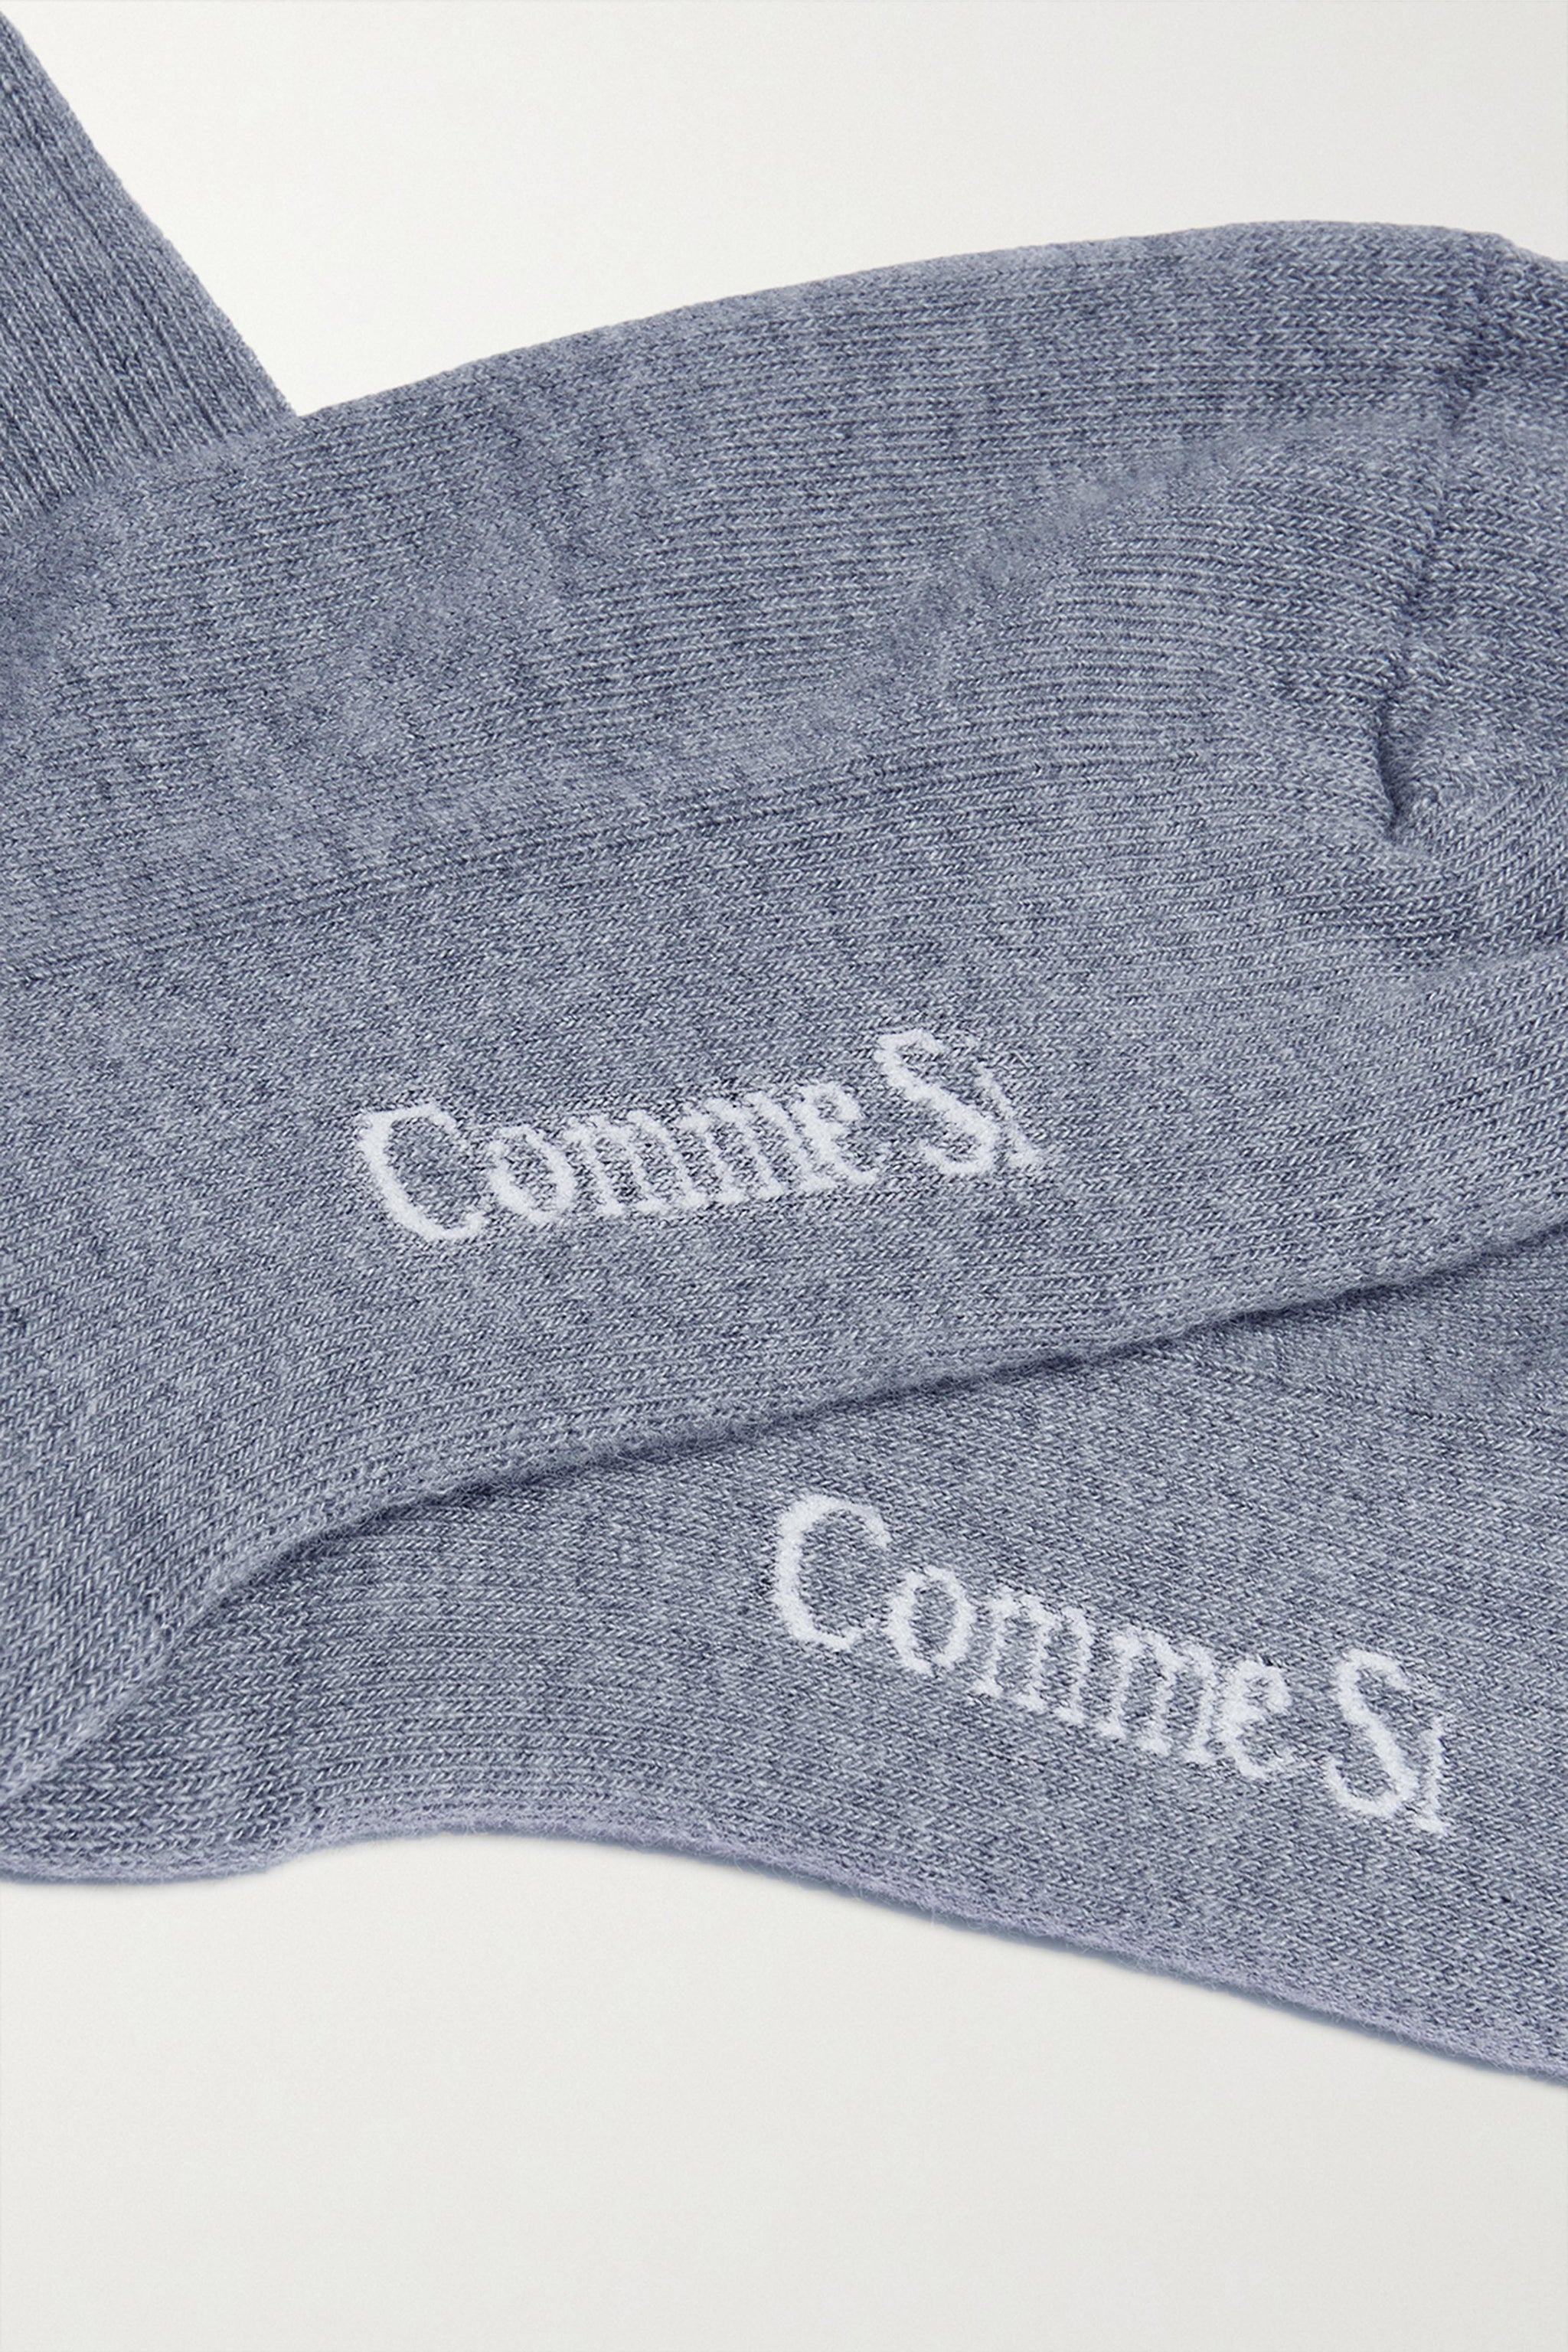 Footbed detail, The Everyday Sock in Stonewashed Blue, made with Organic Egyptian Cotton, by Comme Si